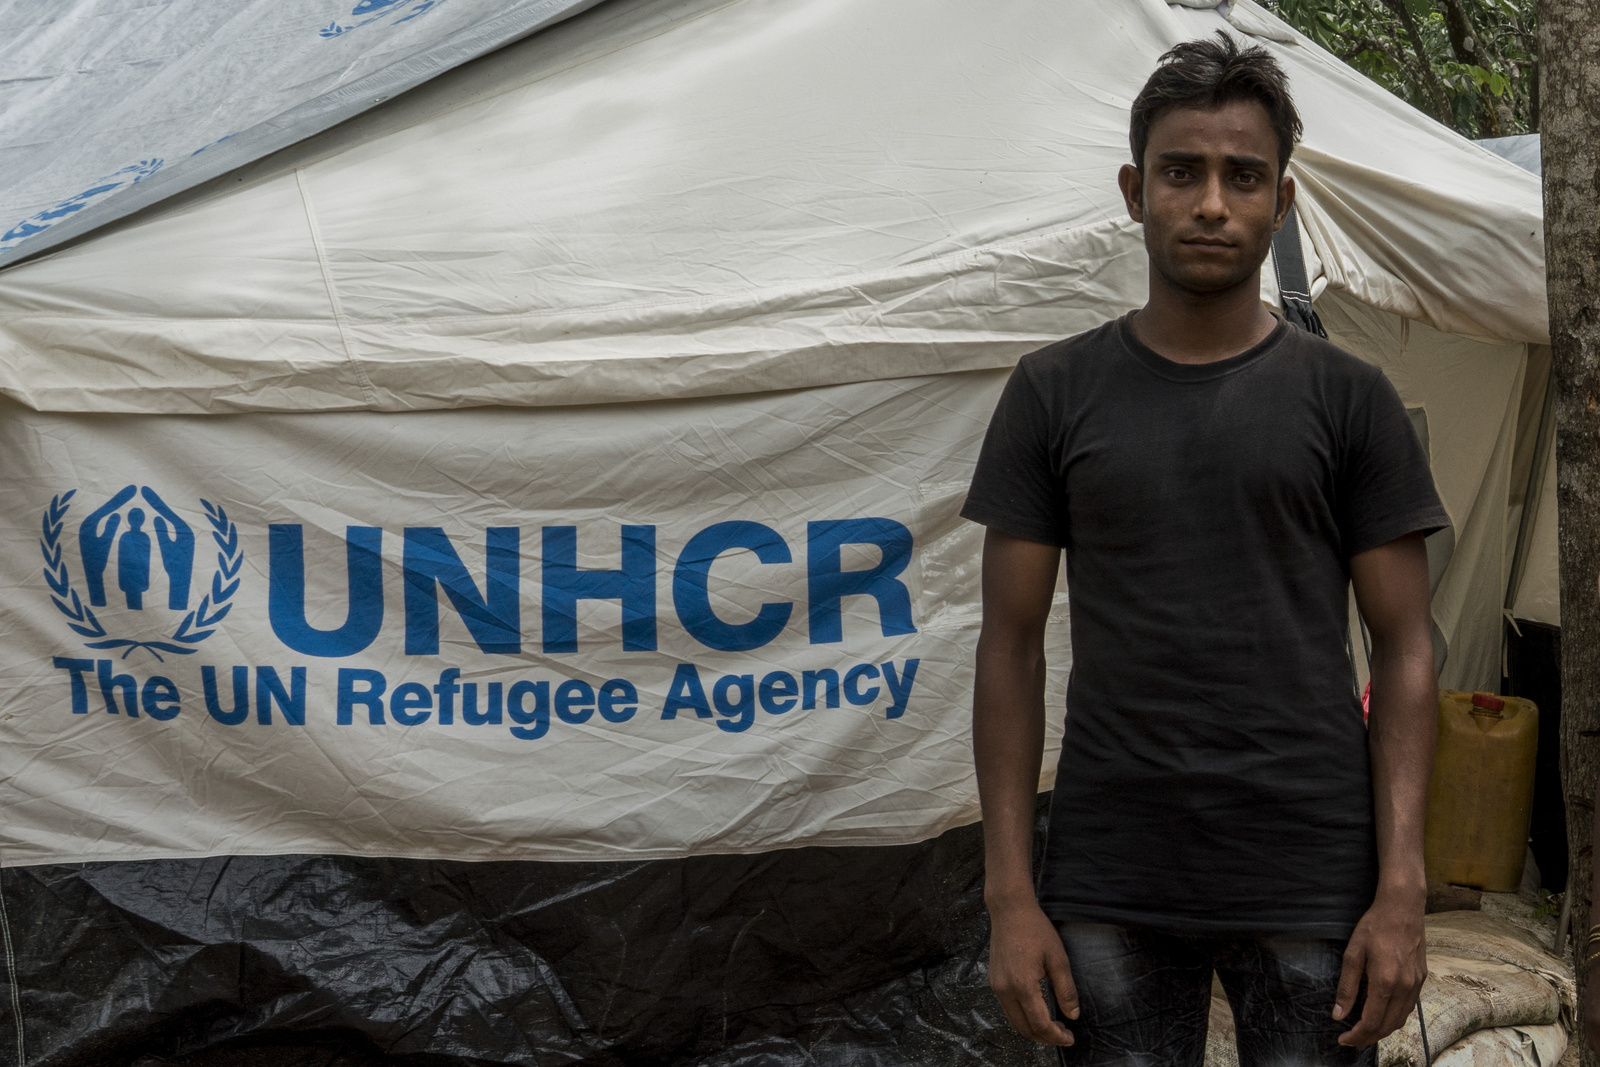 Mohammad Rafique, 20, a Rohingya refugee who fled Myanmar 40 days ago stands outside his tent in the UNHCR Transit Camp near Kutupalong refugee camp in Bangladesh on June 29th, 2018.